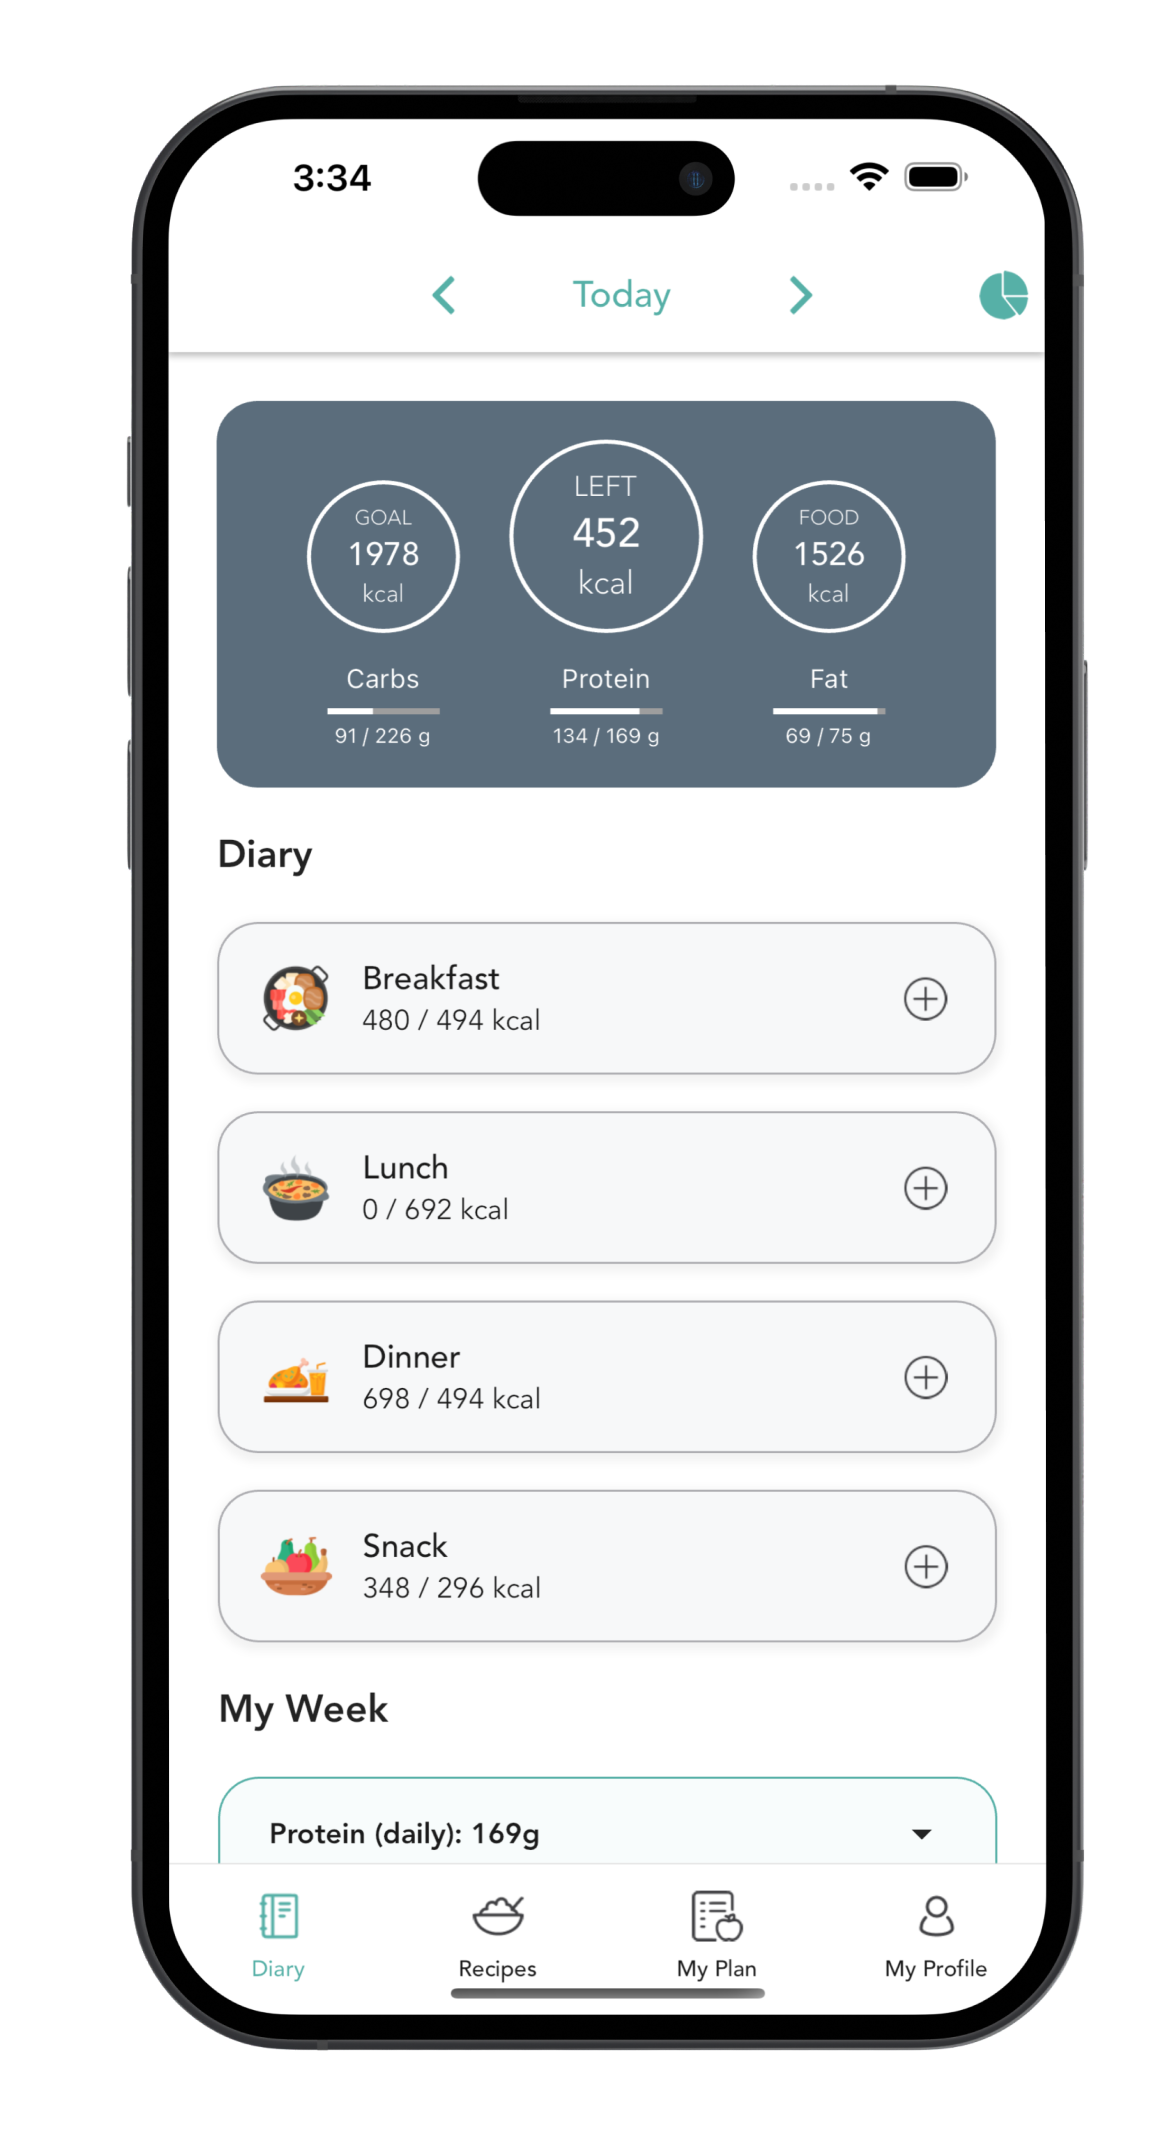 10 Best Calorie Counting Apps of 2023